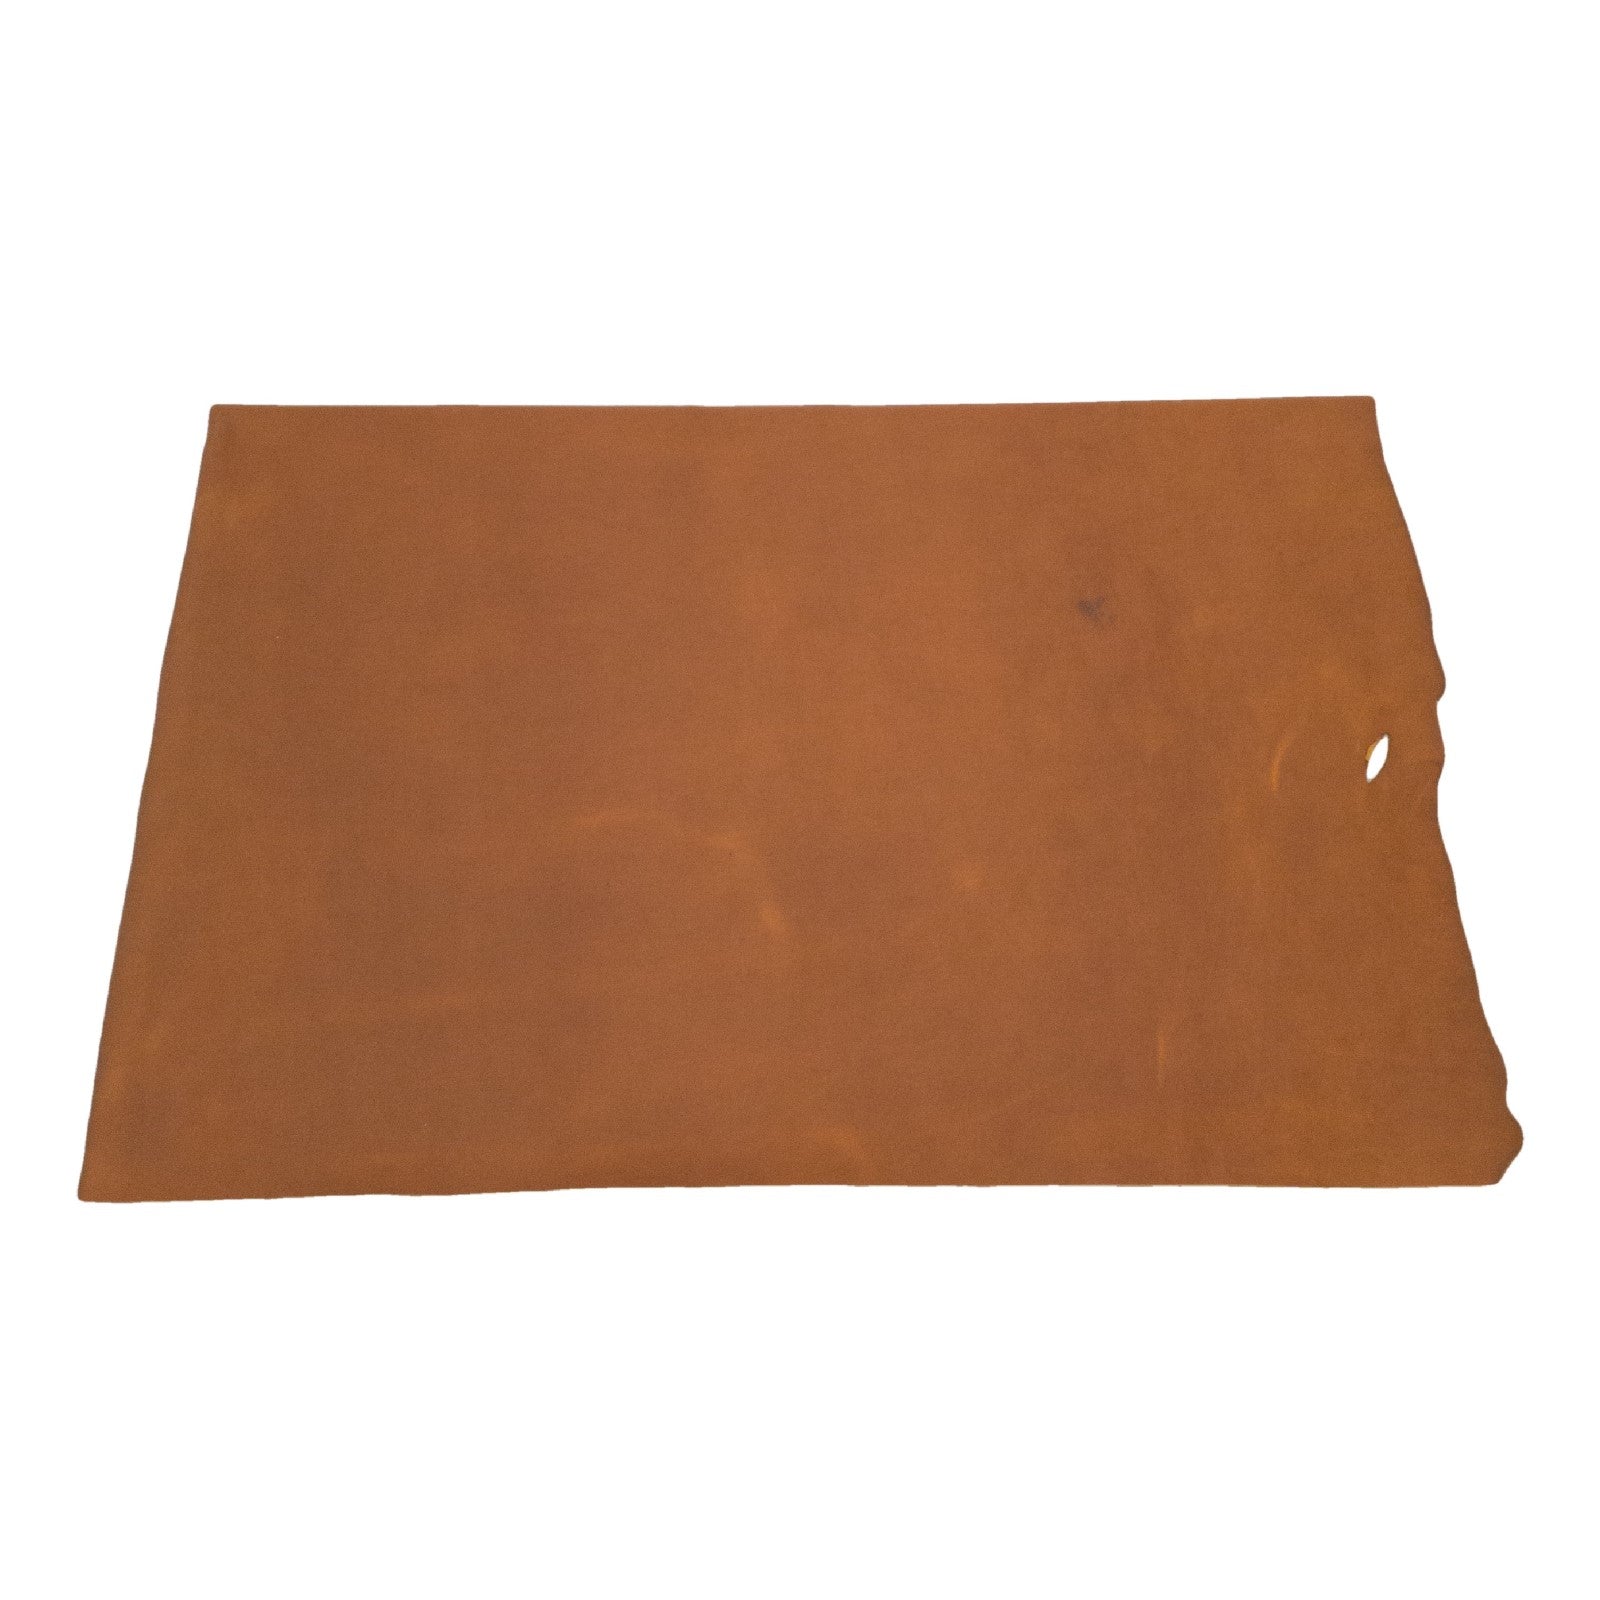 Authentic Light Oro Russet, SB Foot, Non-stock, 5-6oz, Oil Tanned Hides, Middle Piece / 6.5 - 7.5 Sq Ft | The Leather Guy